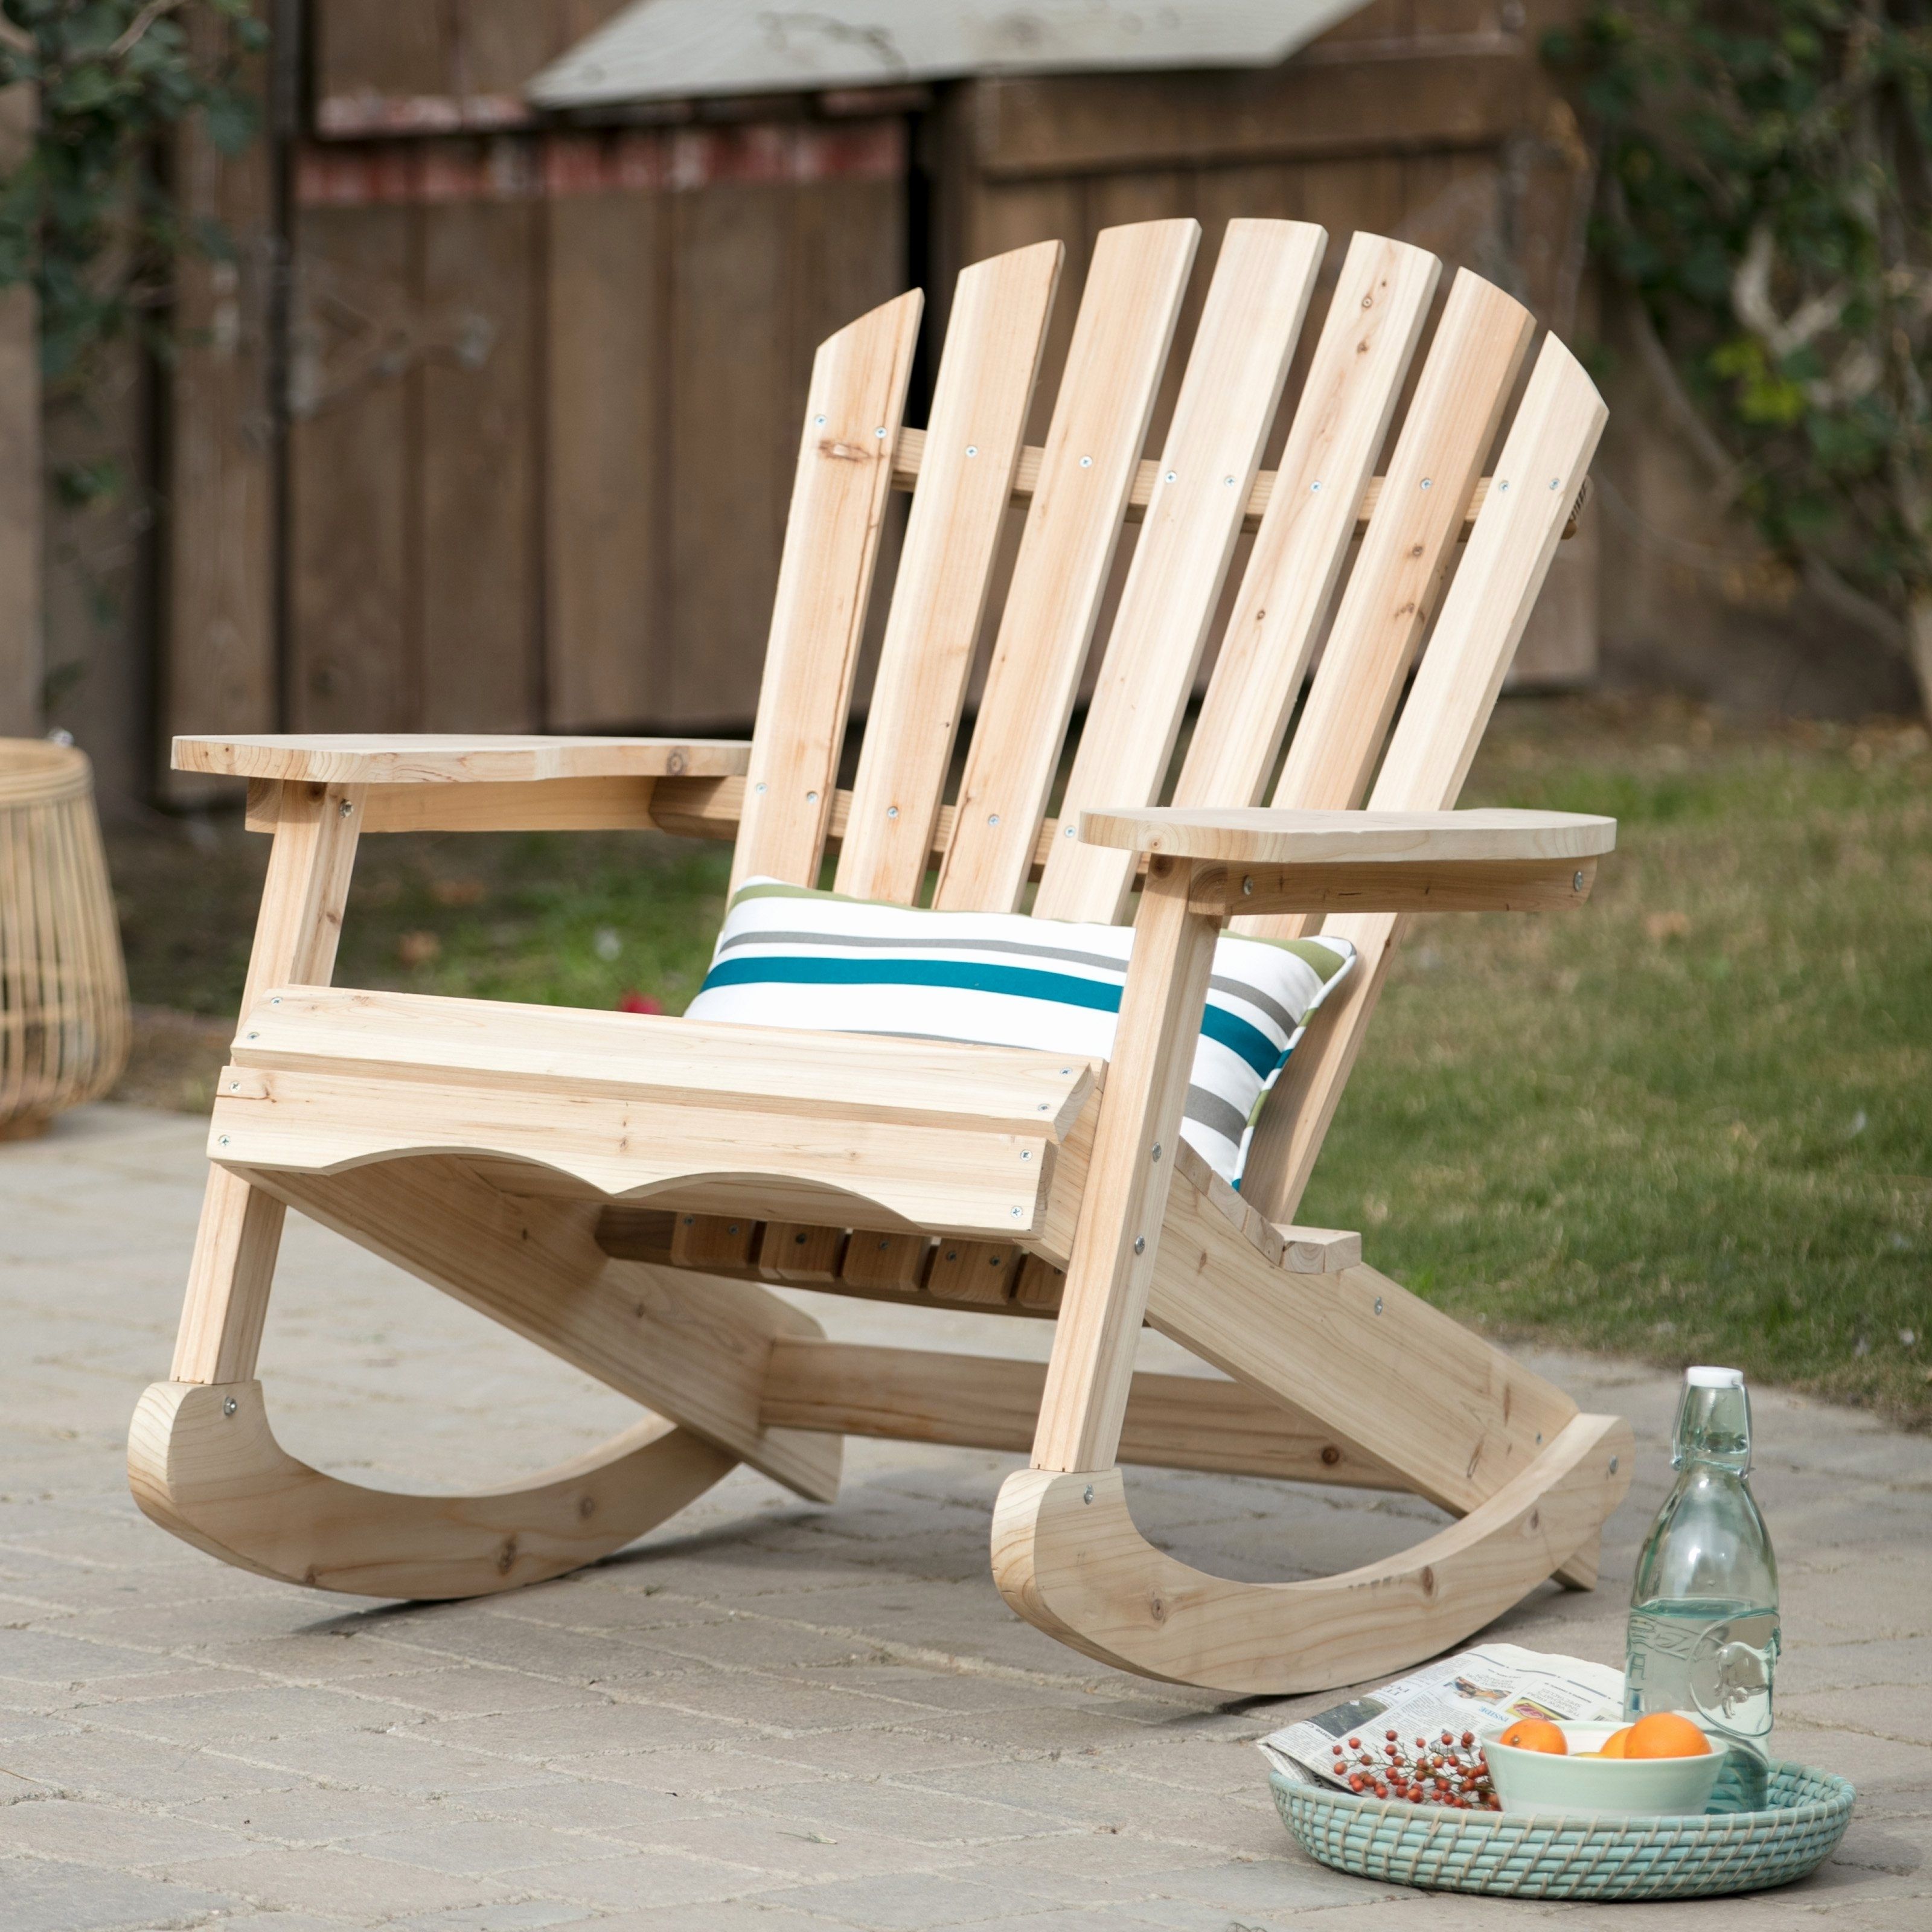 Outdoor Vinyl Rocking Chairs Designs Bench Elegant Chair Patio For Outdoor Vinyl Rocking Chairs (View 10 of 15)